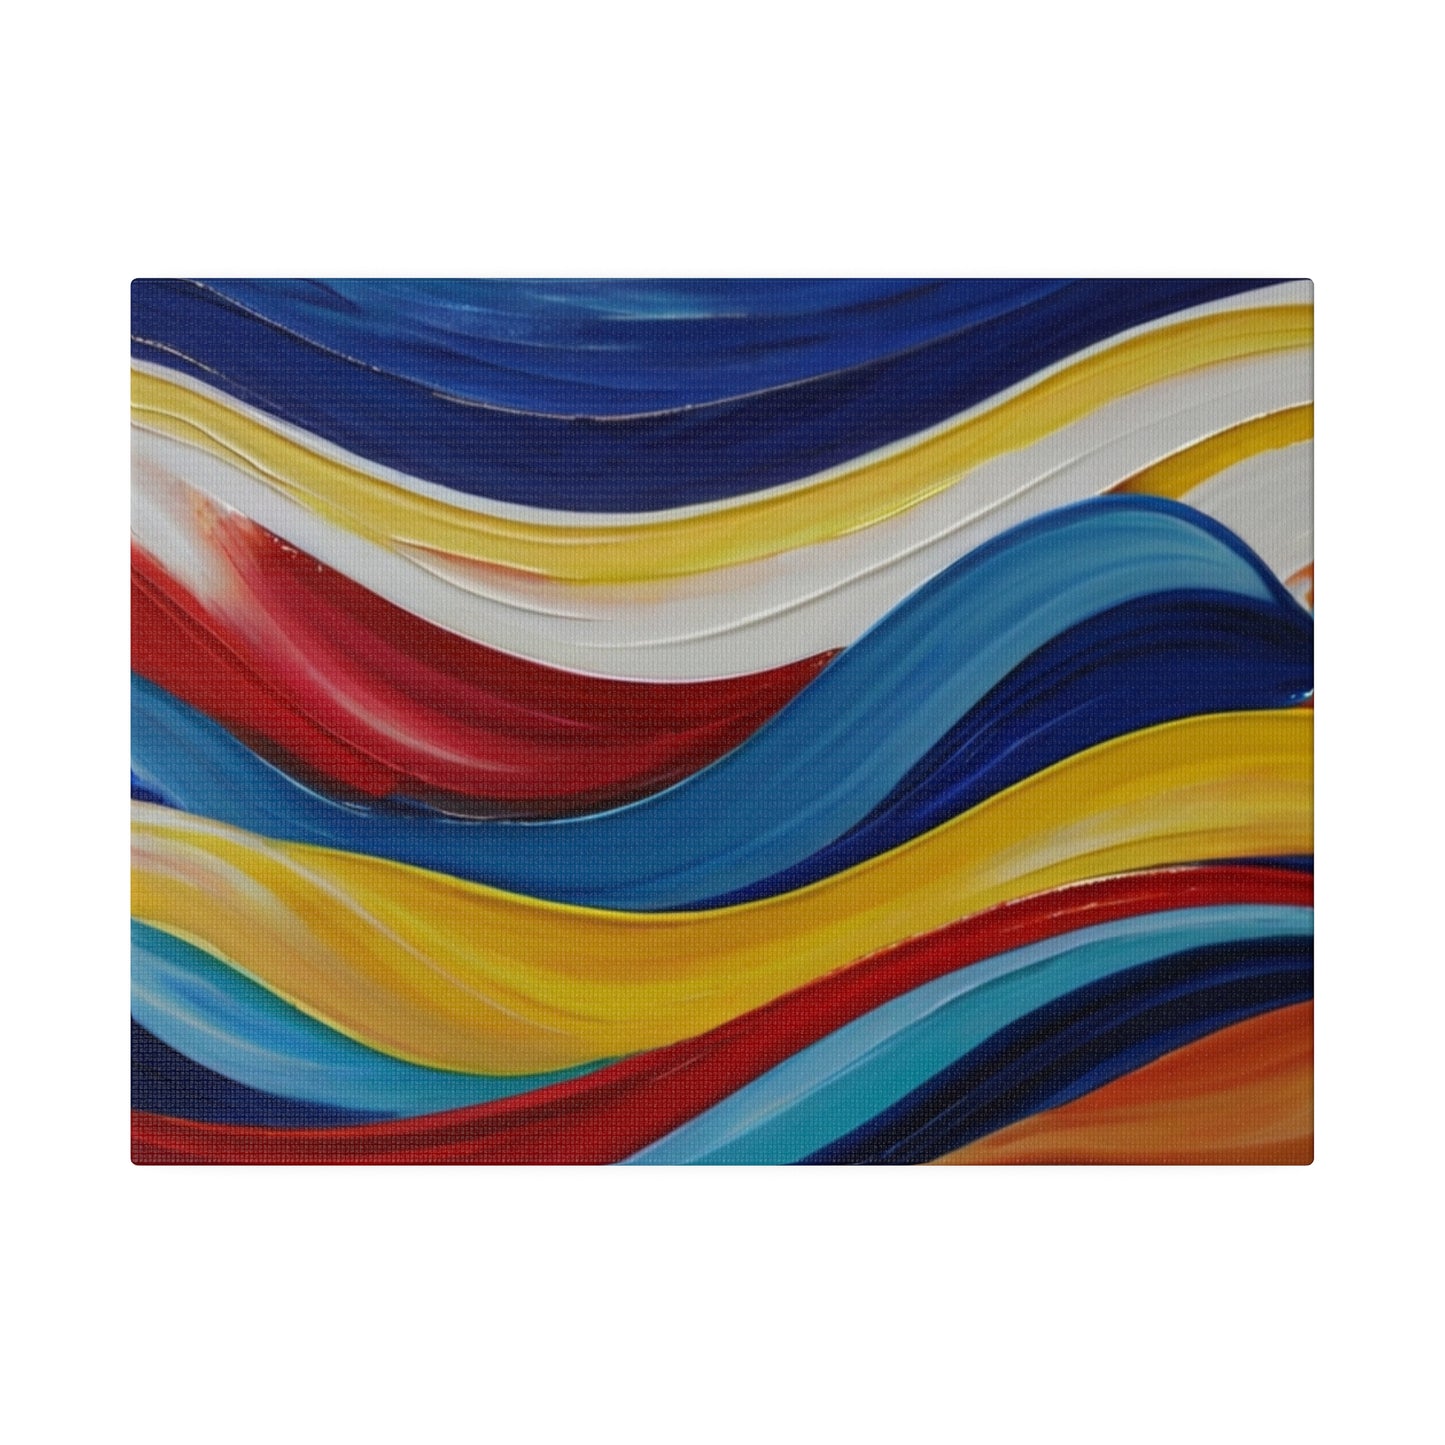 Colourful Waves At Sea - Matte Canvas, Stretched, 0.75"